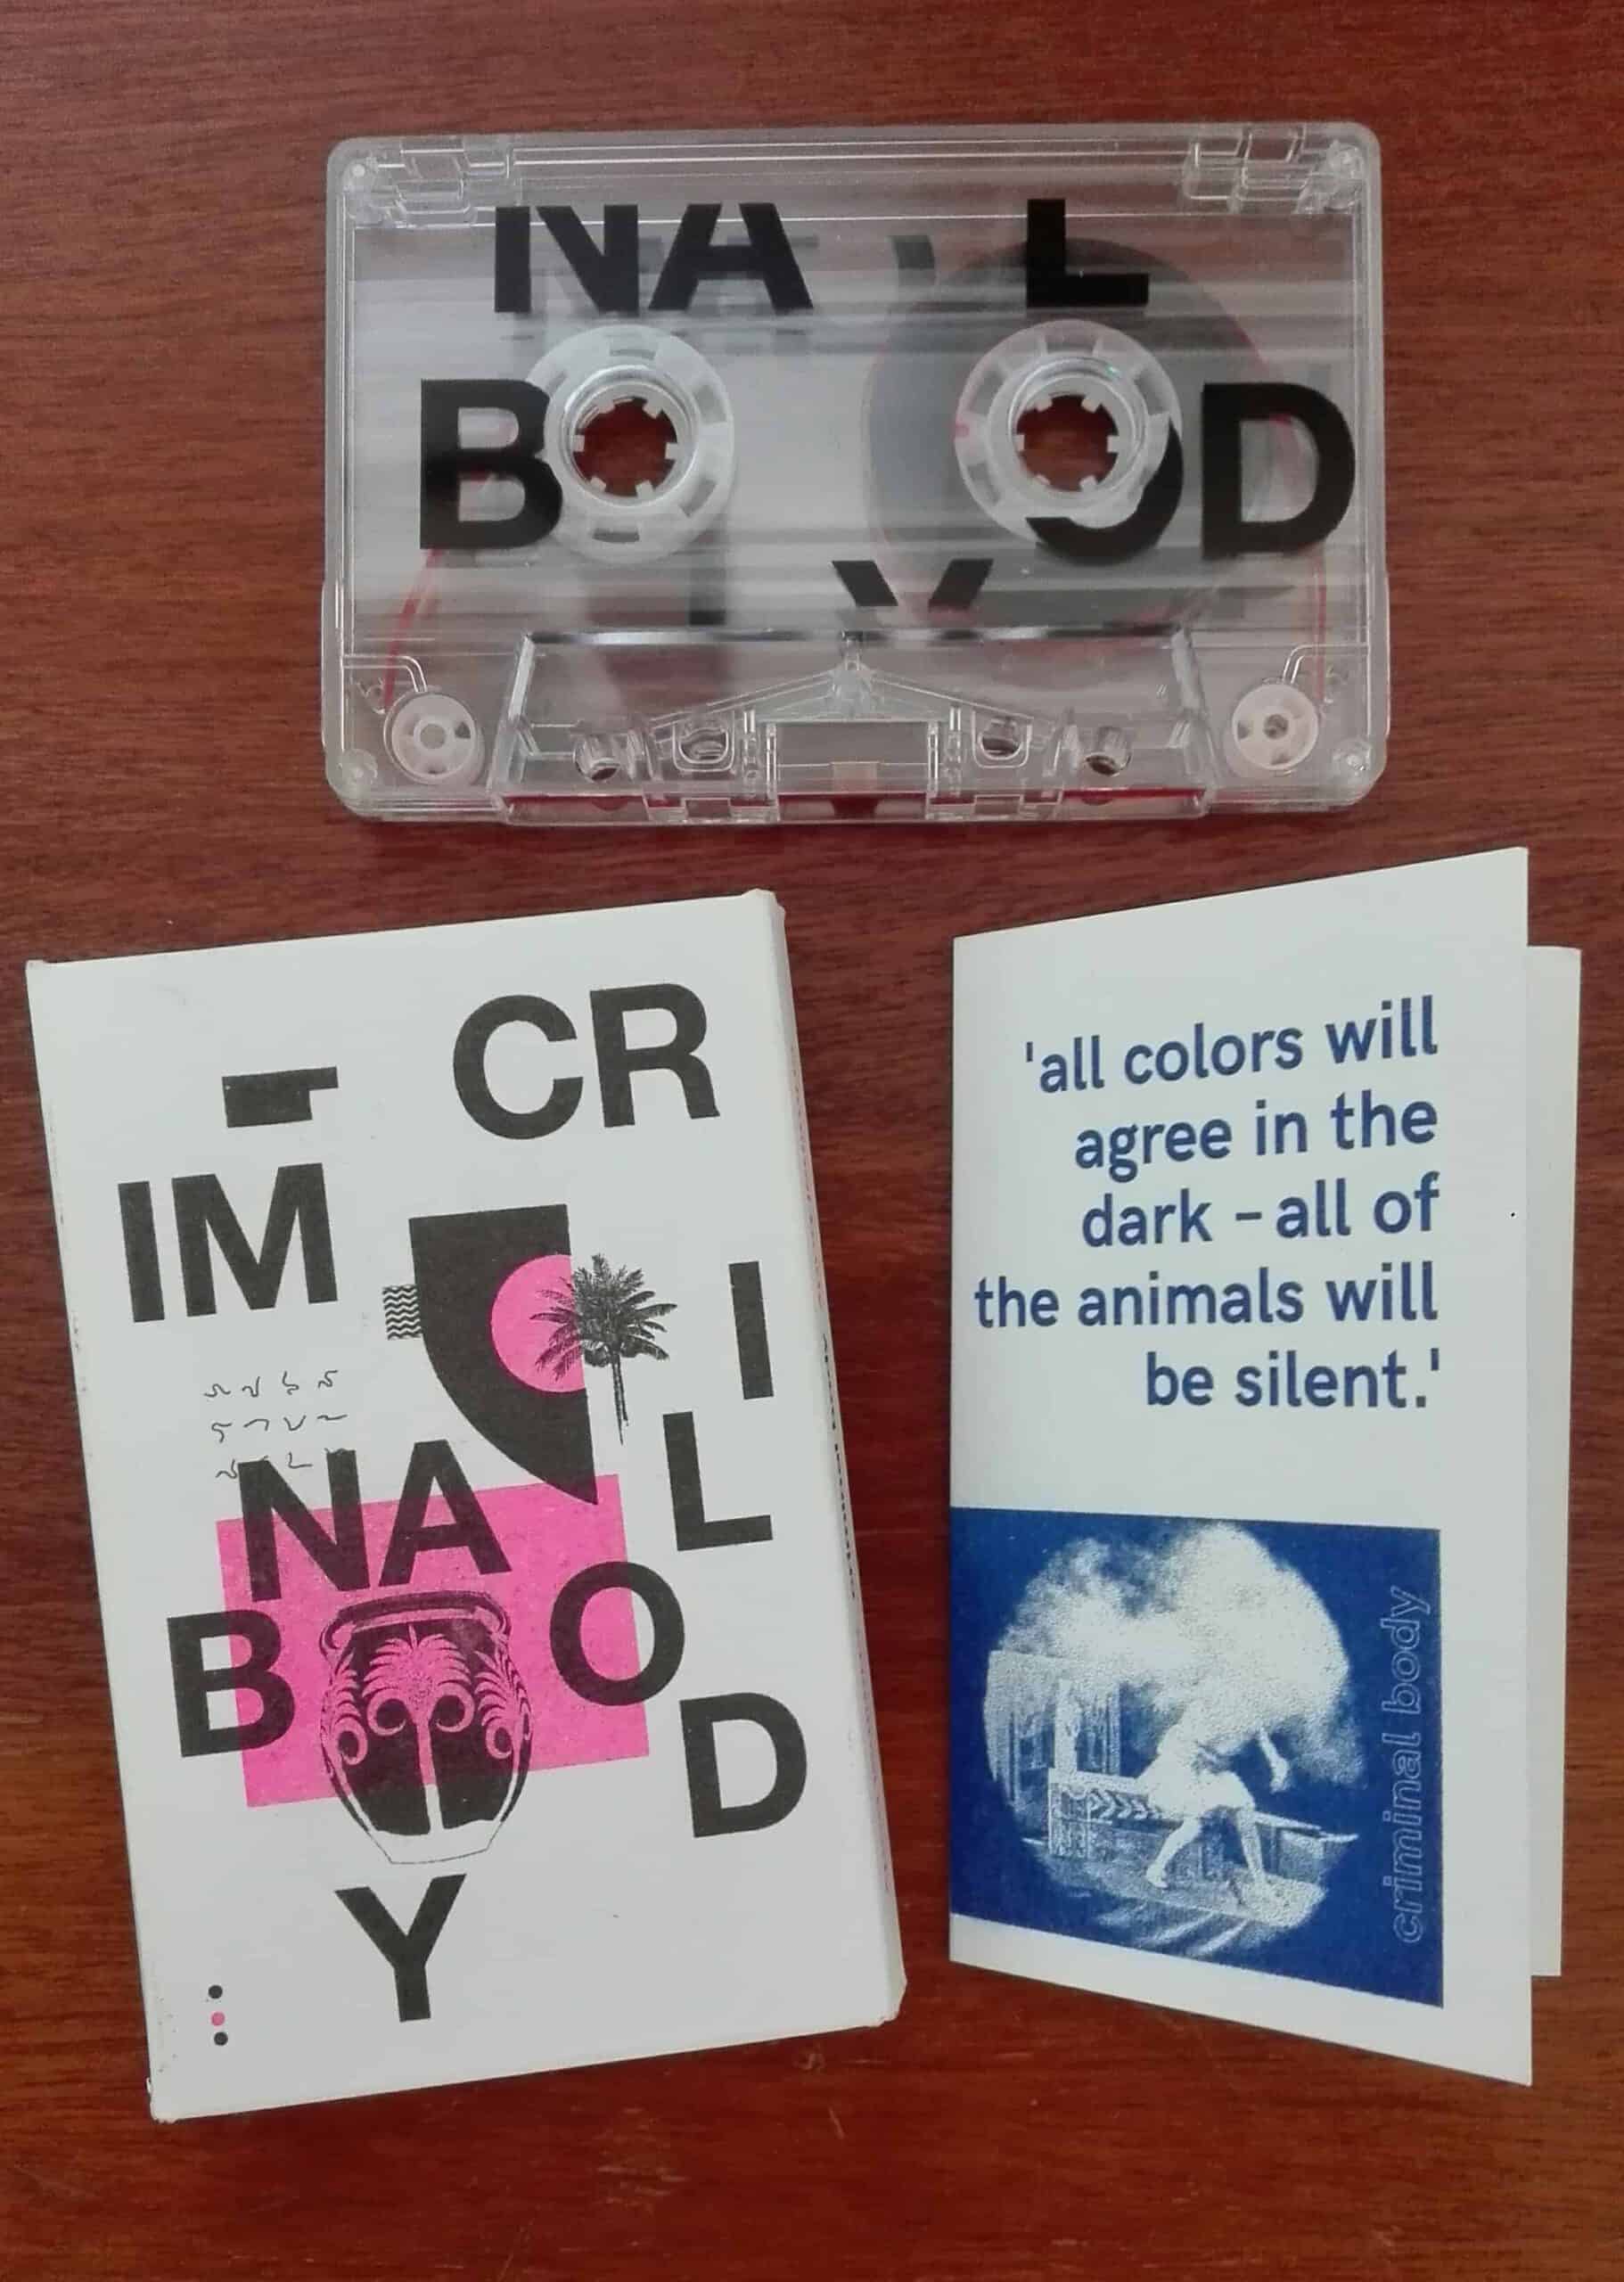 Criminal Body - s/t LP/Tape/digital Pressing Info: 12": 100x magenta (SOLD OUT), 200x white tape: 100 copies